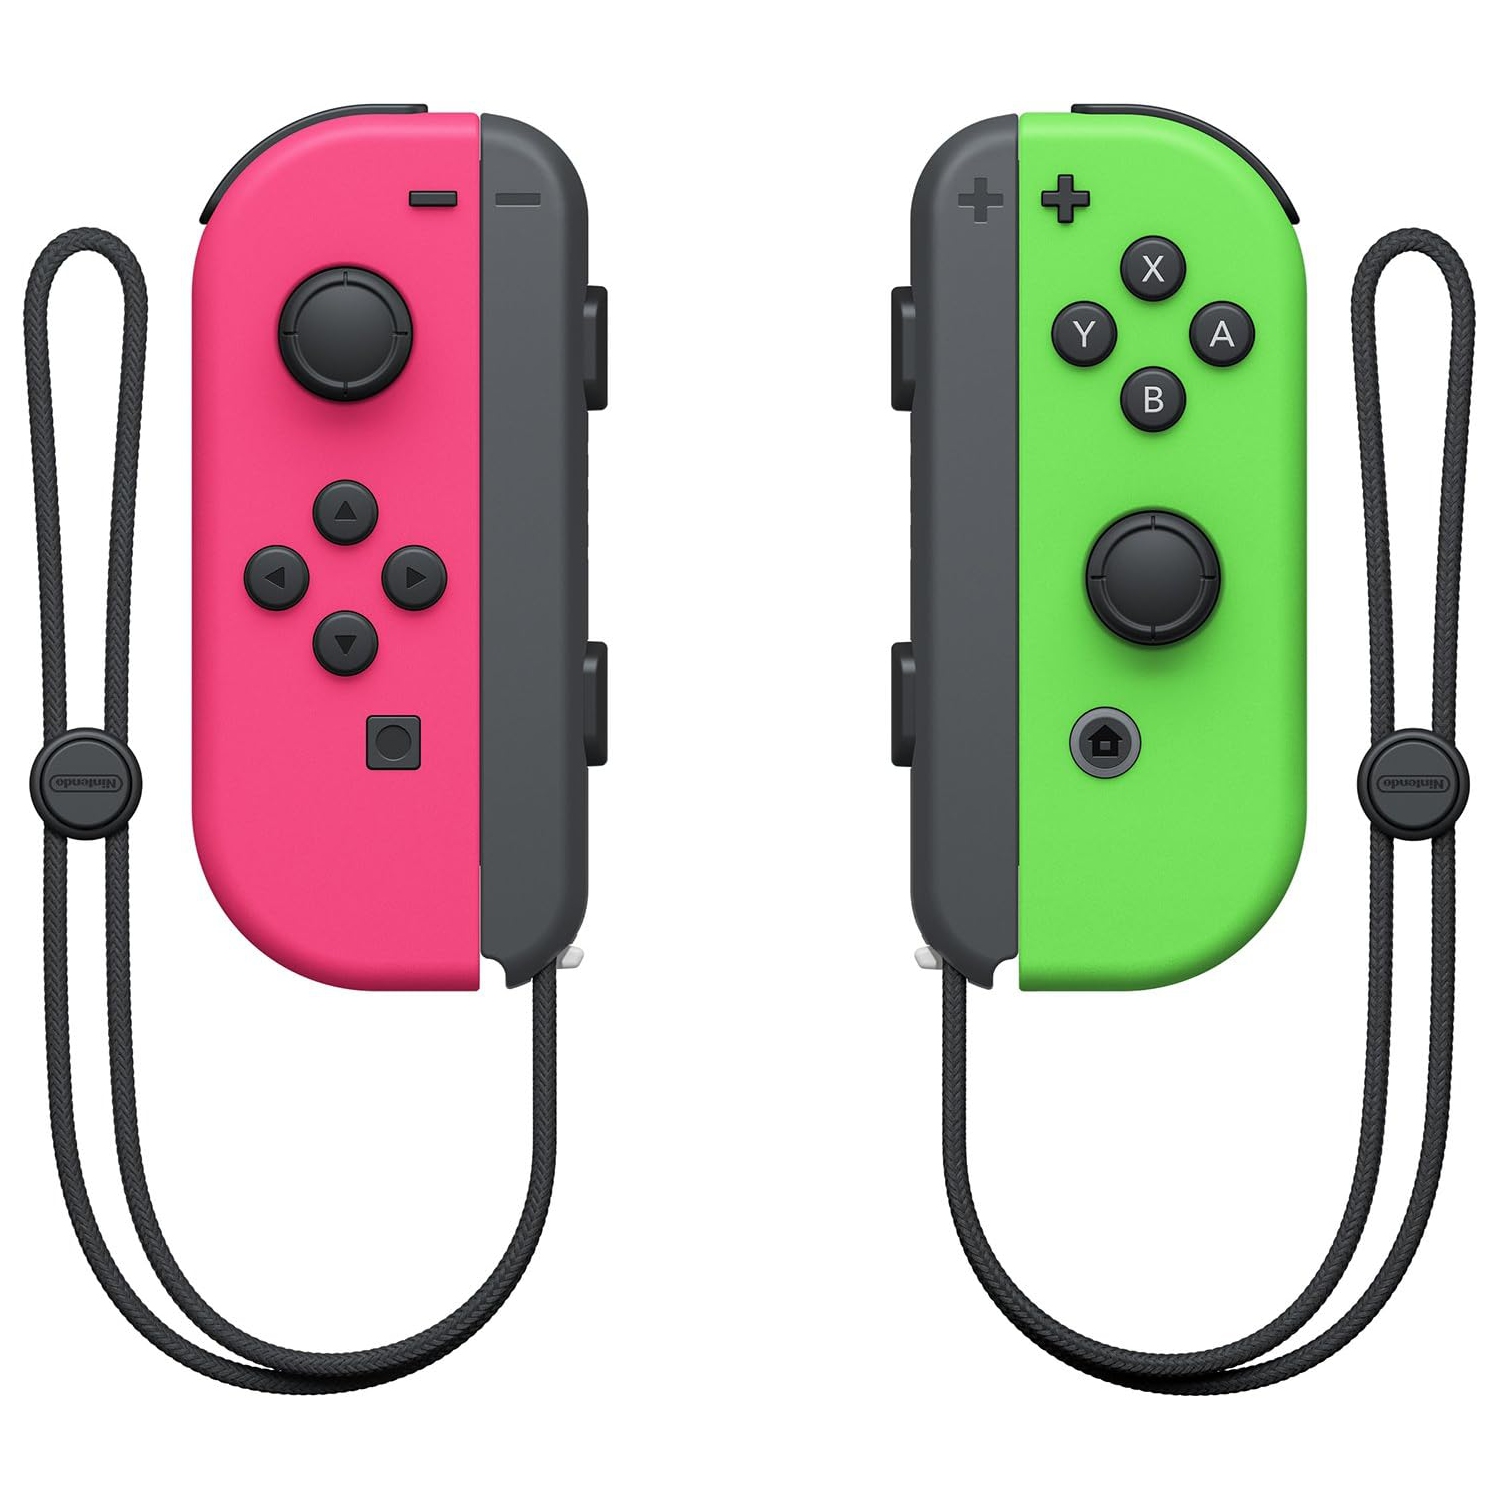 Refurbished (Good) Nintendo Switch Original Left and Right Joy-Con Controllers - Neon Pink / Green